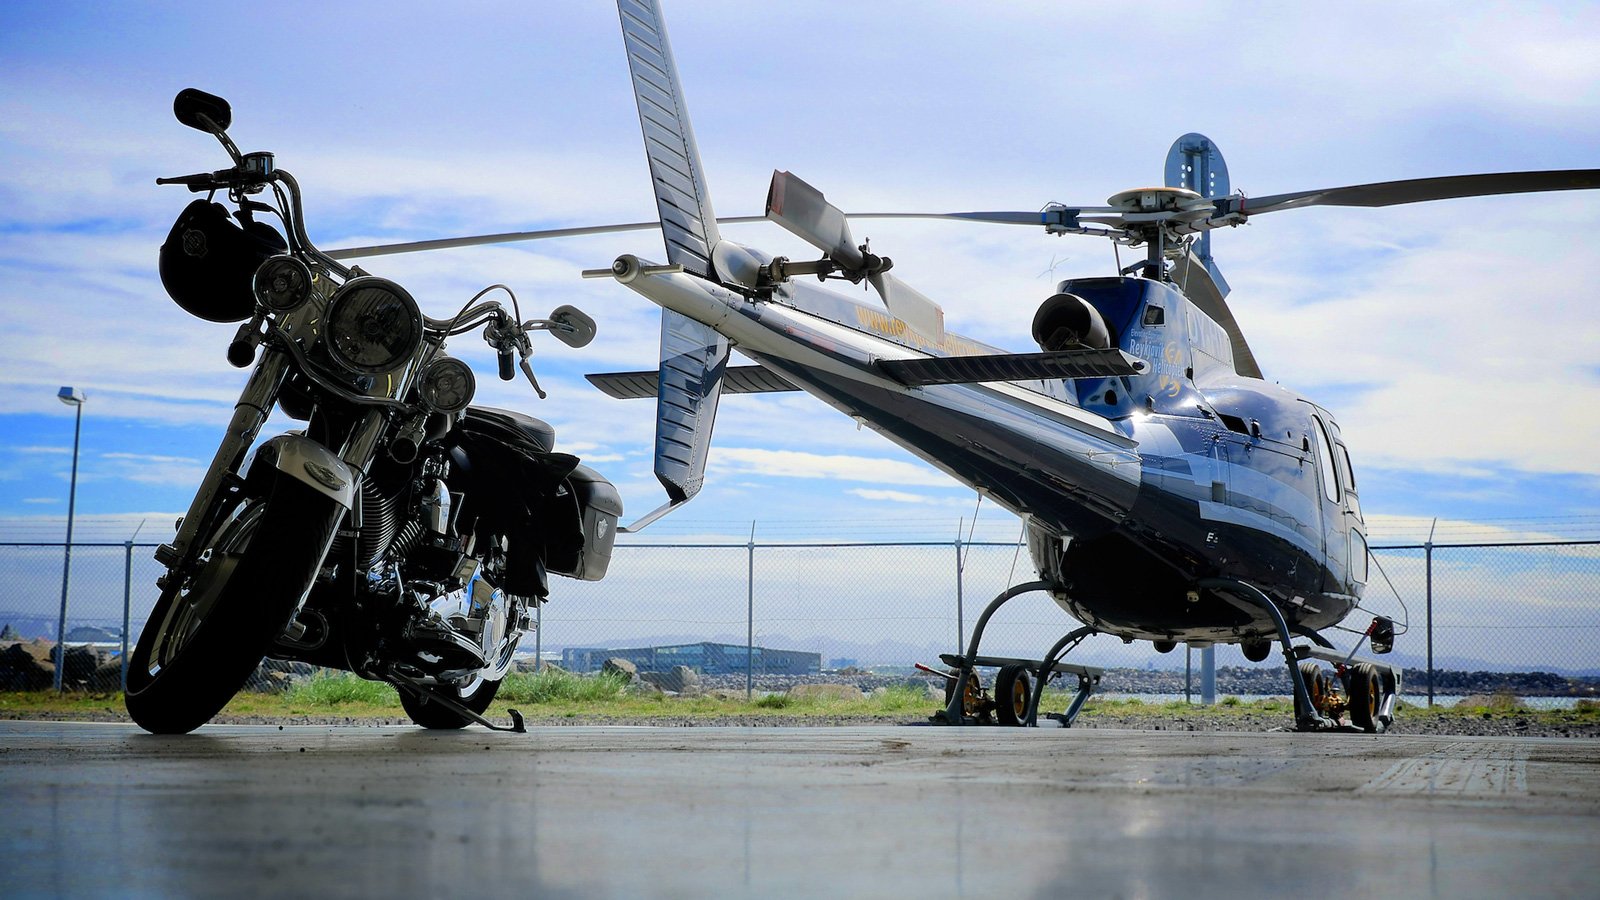 Harley Davidson and Ecurail helicopter. Reykjavik Helicopters Iceland - photo by Jon Gustafsson.